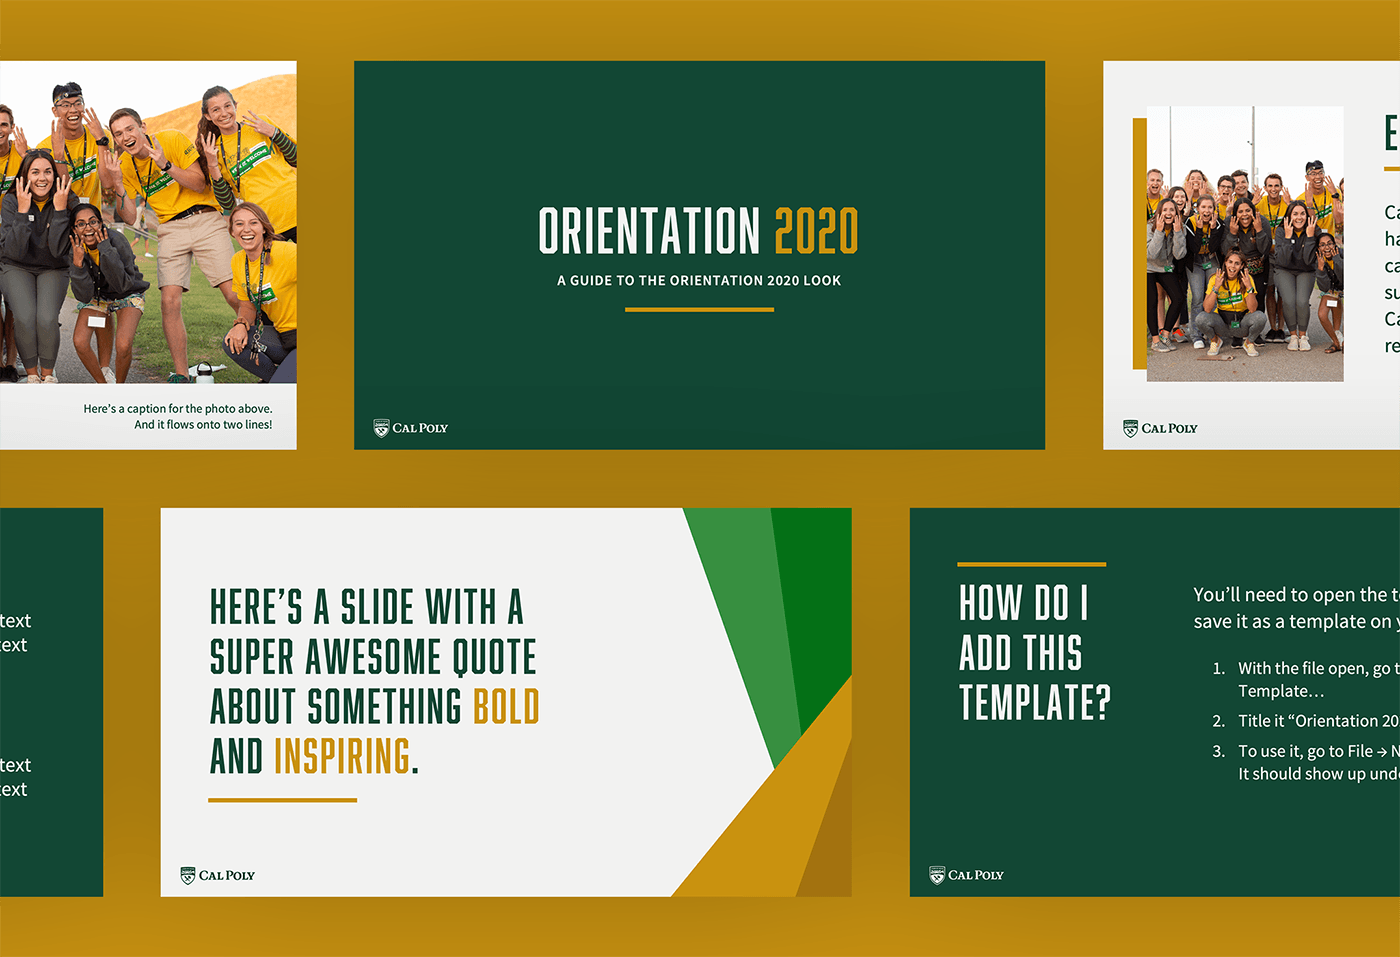 Six slides from the Orientation 2020 PowerPoint template shown side-by-side in two rows, with three slides in each row. They are filled with placeholder images and text and set against a gold background.